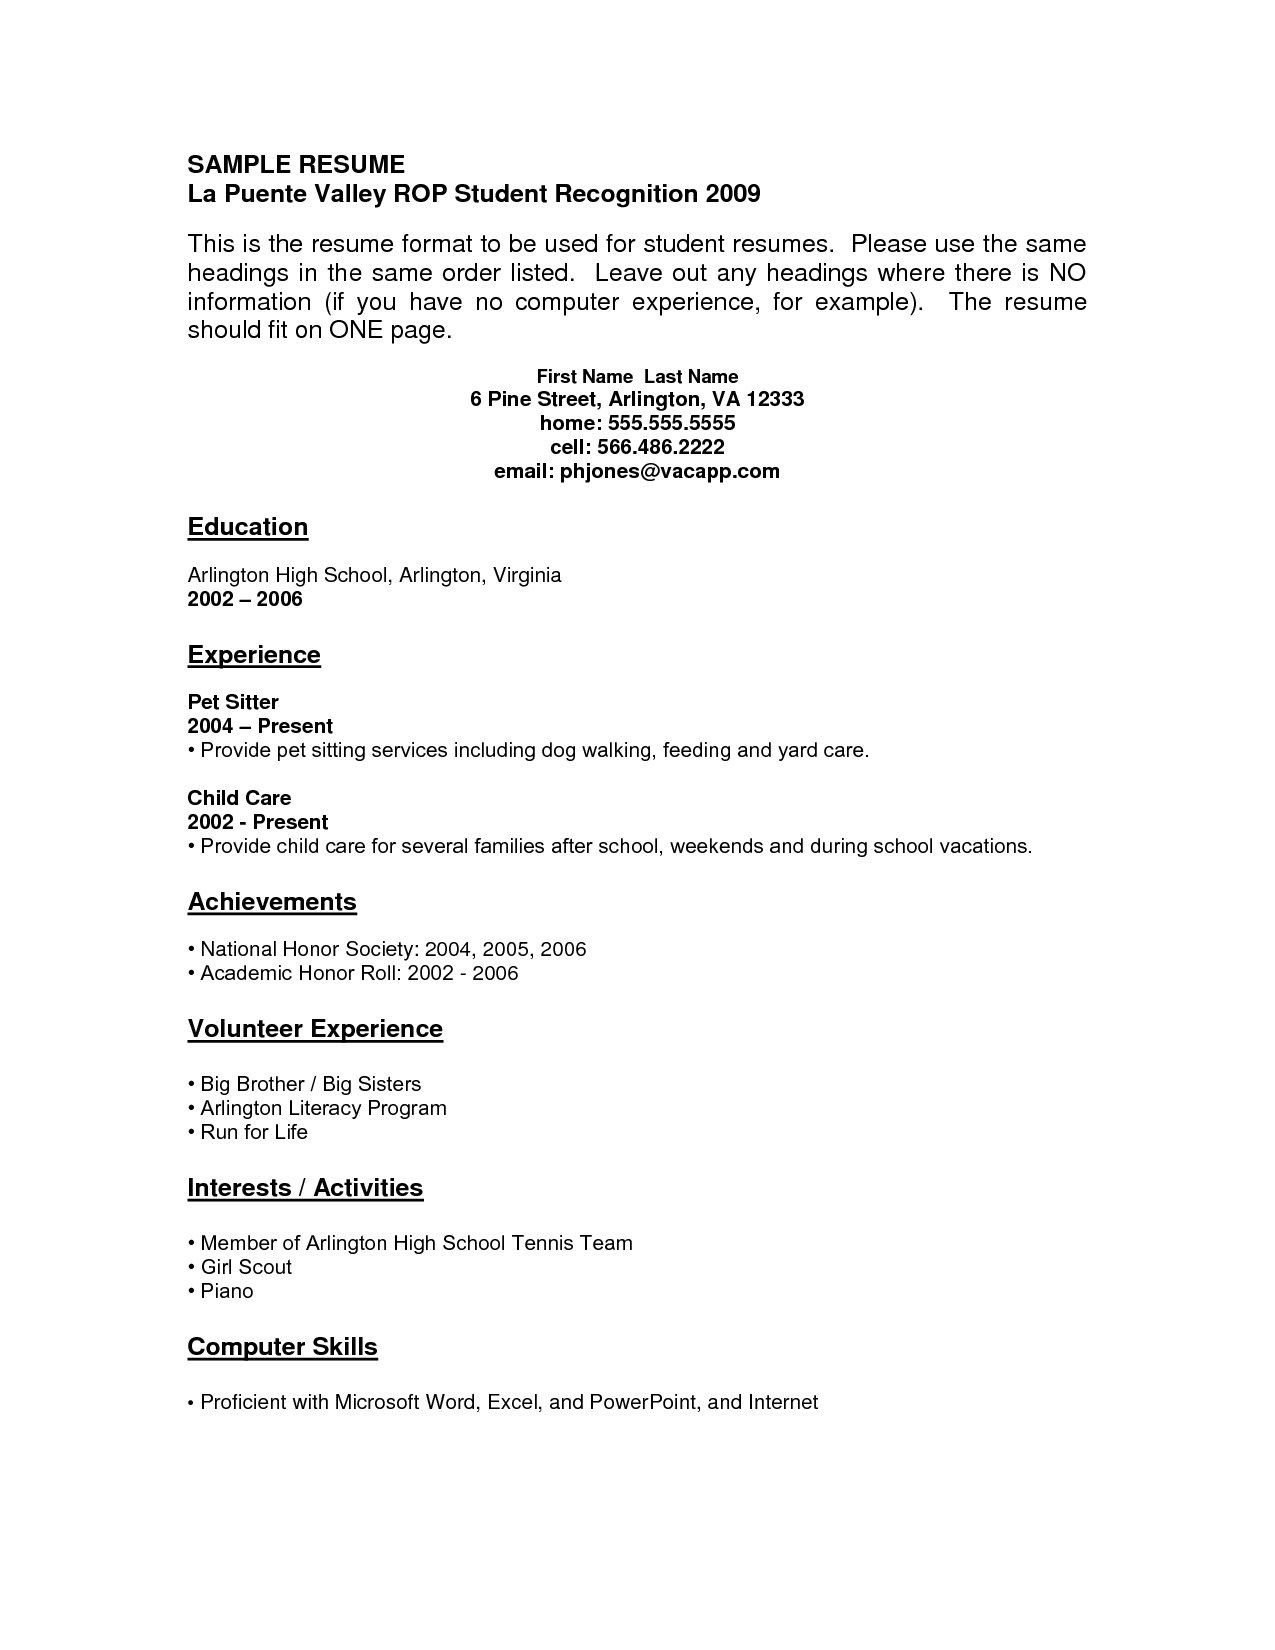 Resume for Teenager with No Work Experience Sample Resume Examples with No Job Experience – Resume Templates Resume …